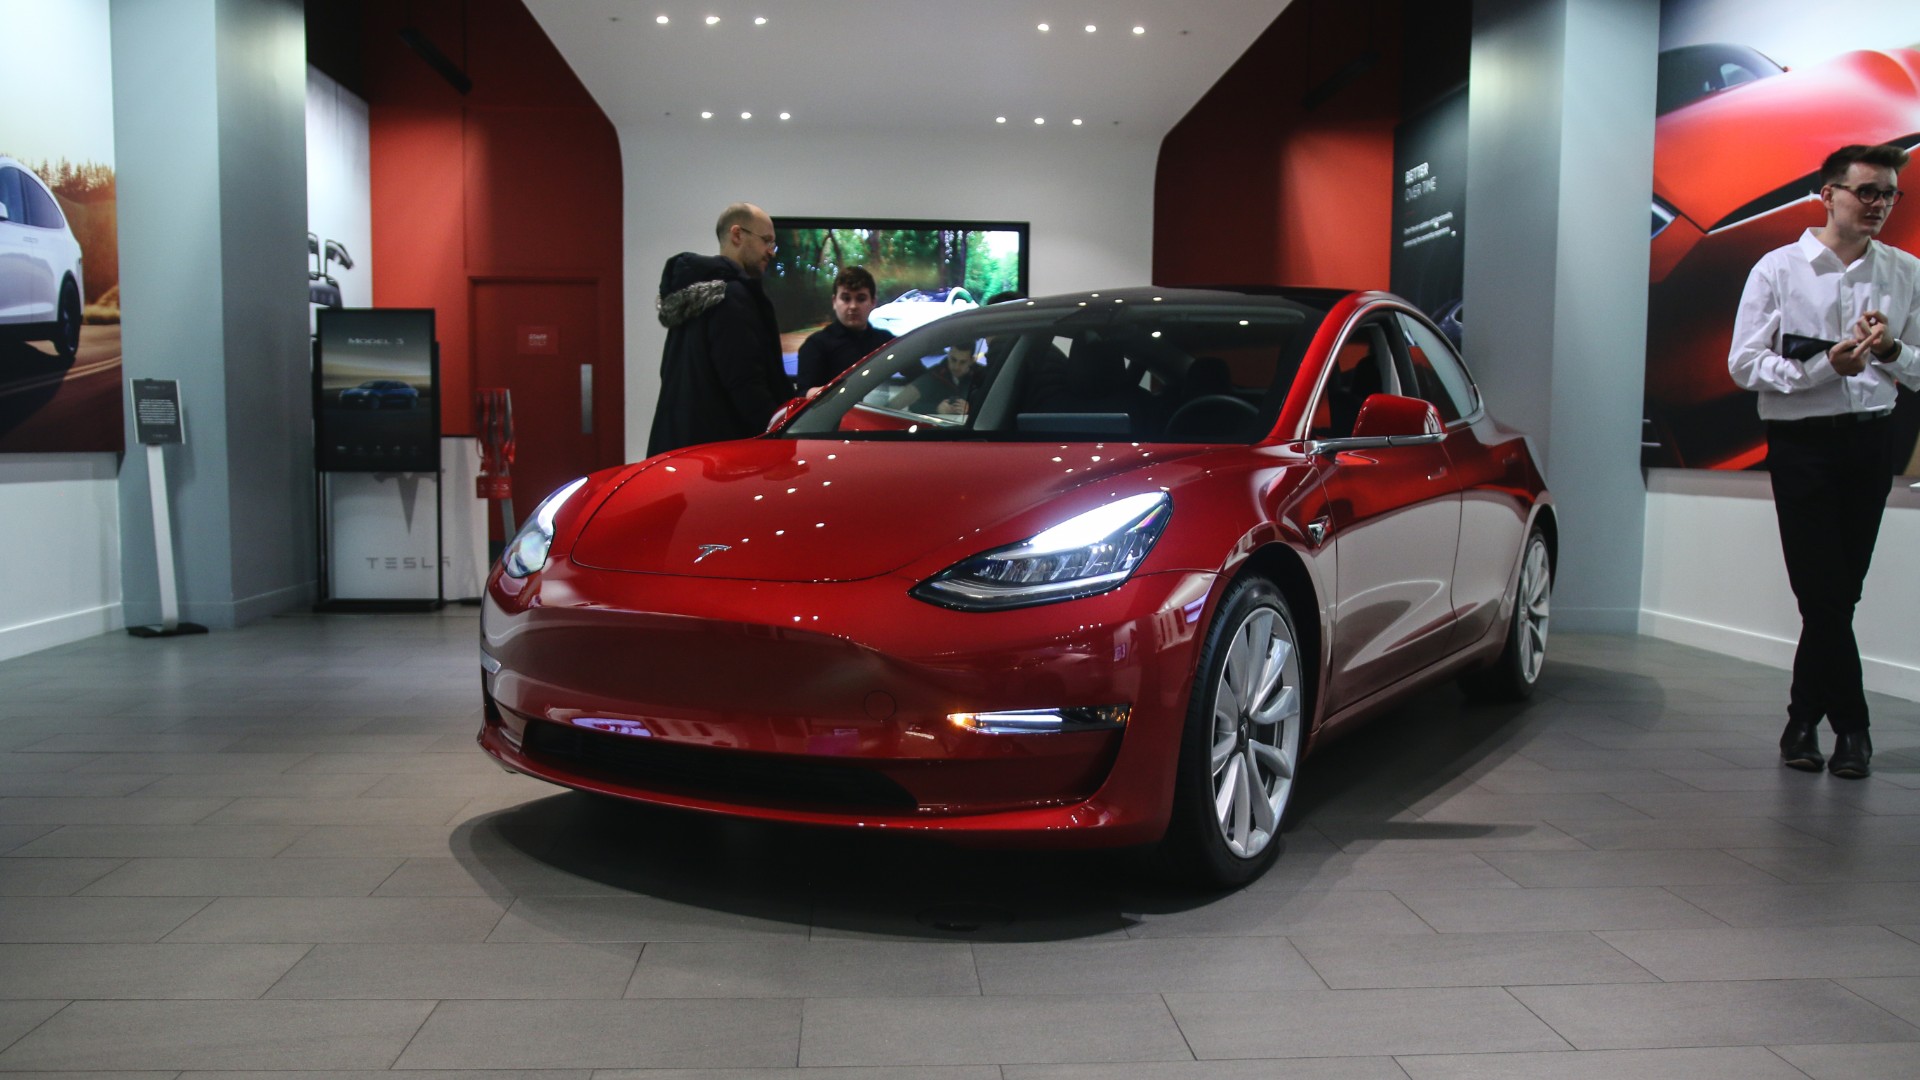 Tesla's Model 3 is the most popular electric car to lease in the UK